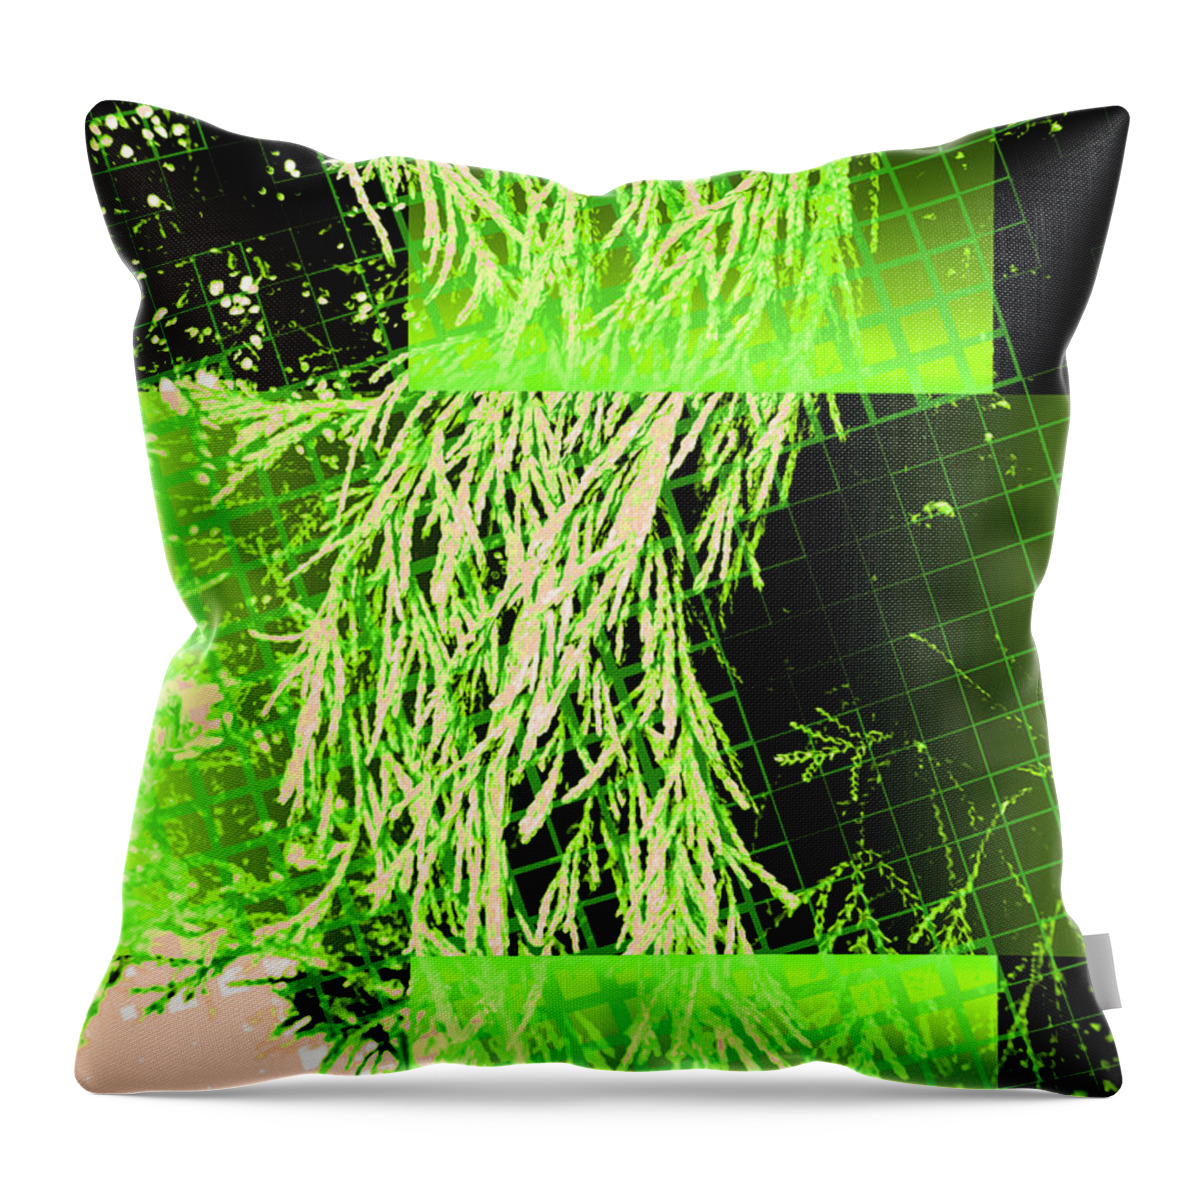 Photos' Landscapes' Abstract' Throw Pillow featuring the photograph Elements 105 by The Lovelock experience